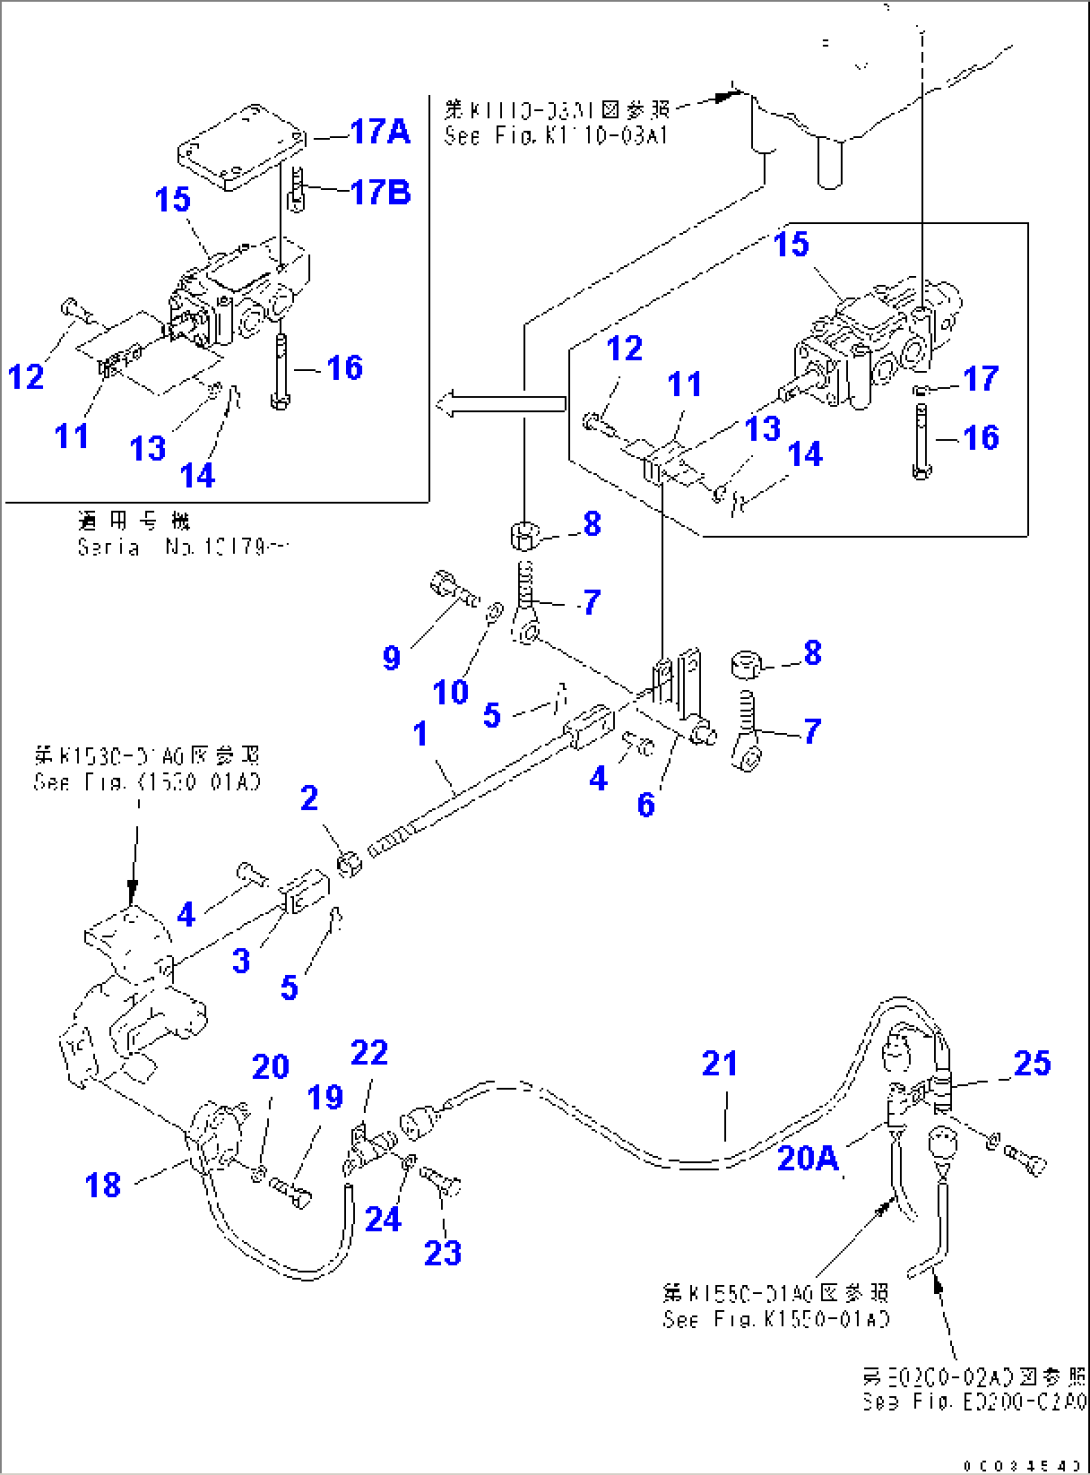 CONTROL LINKAGE (FOR ADDITIONAL PIPING) (FOR WRIST CONTROL)